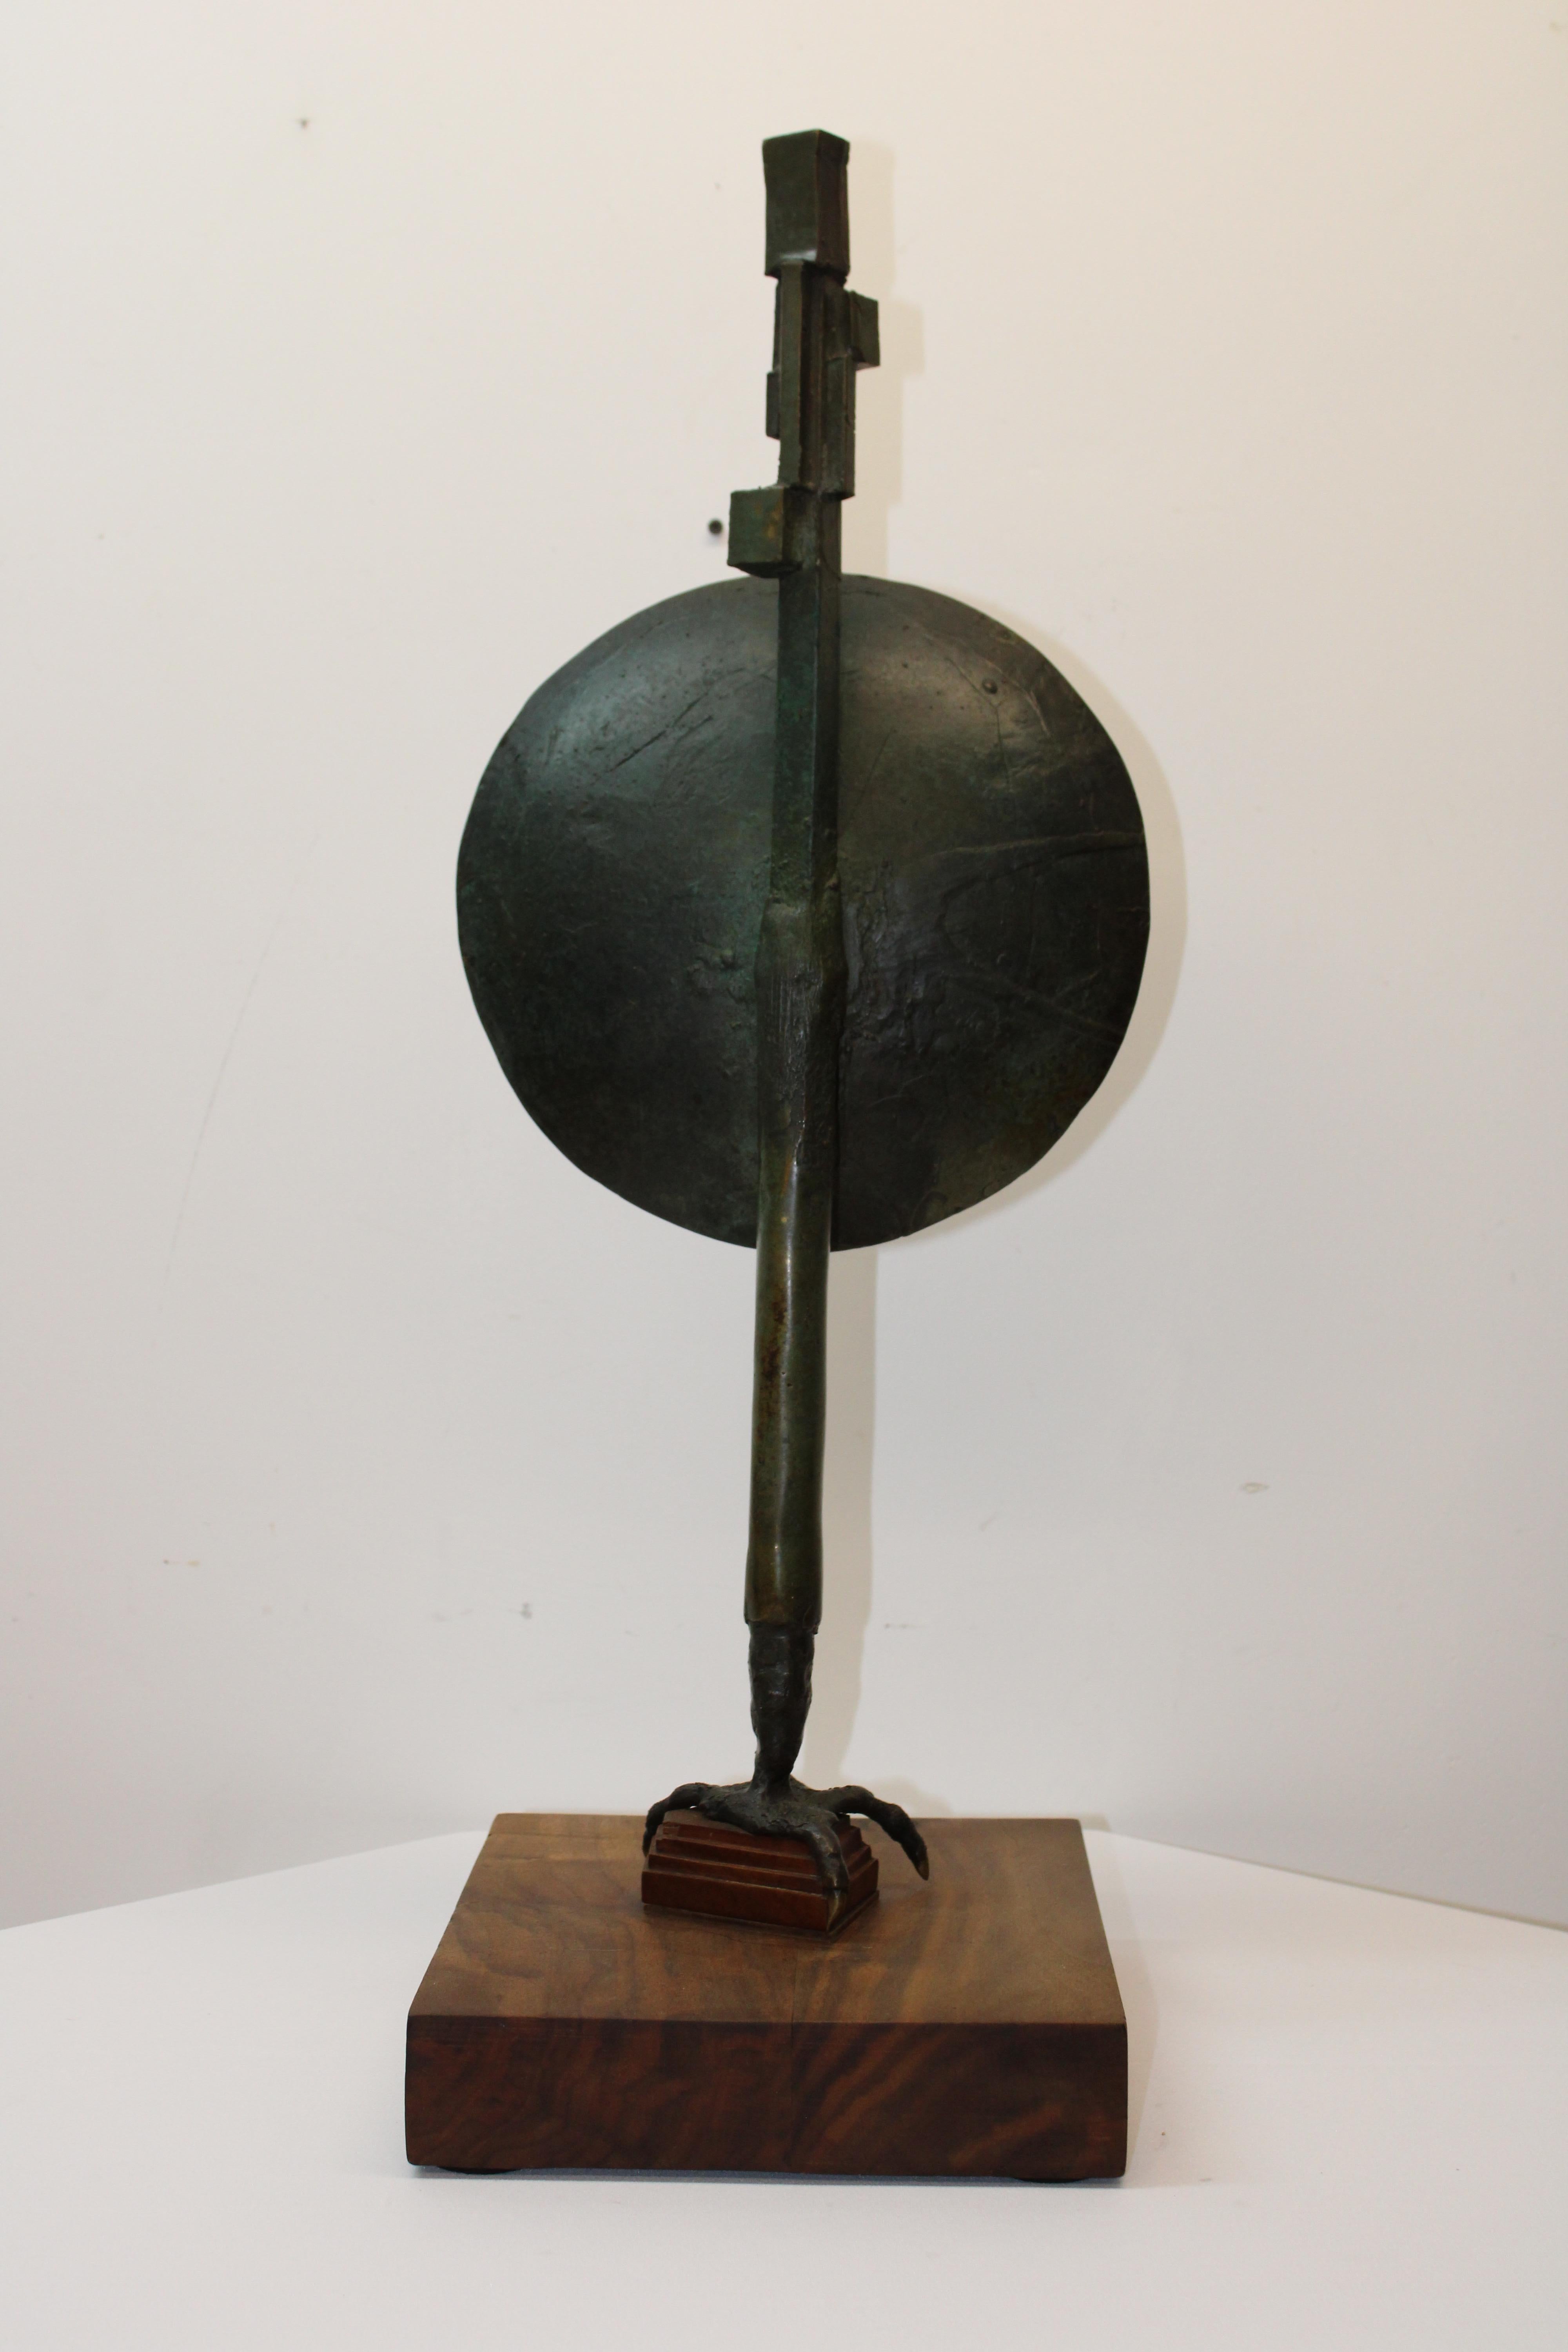 Metal One of a Kind Abstract Sculpture After Picasso on Wood Base For Sale